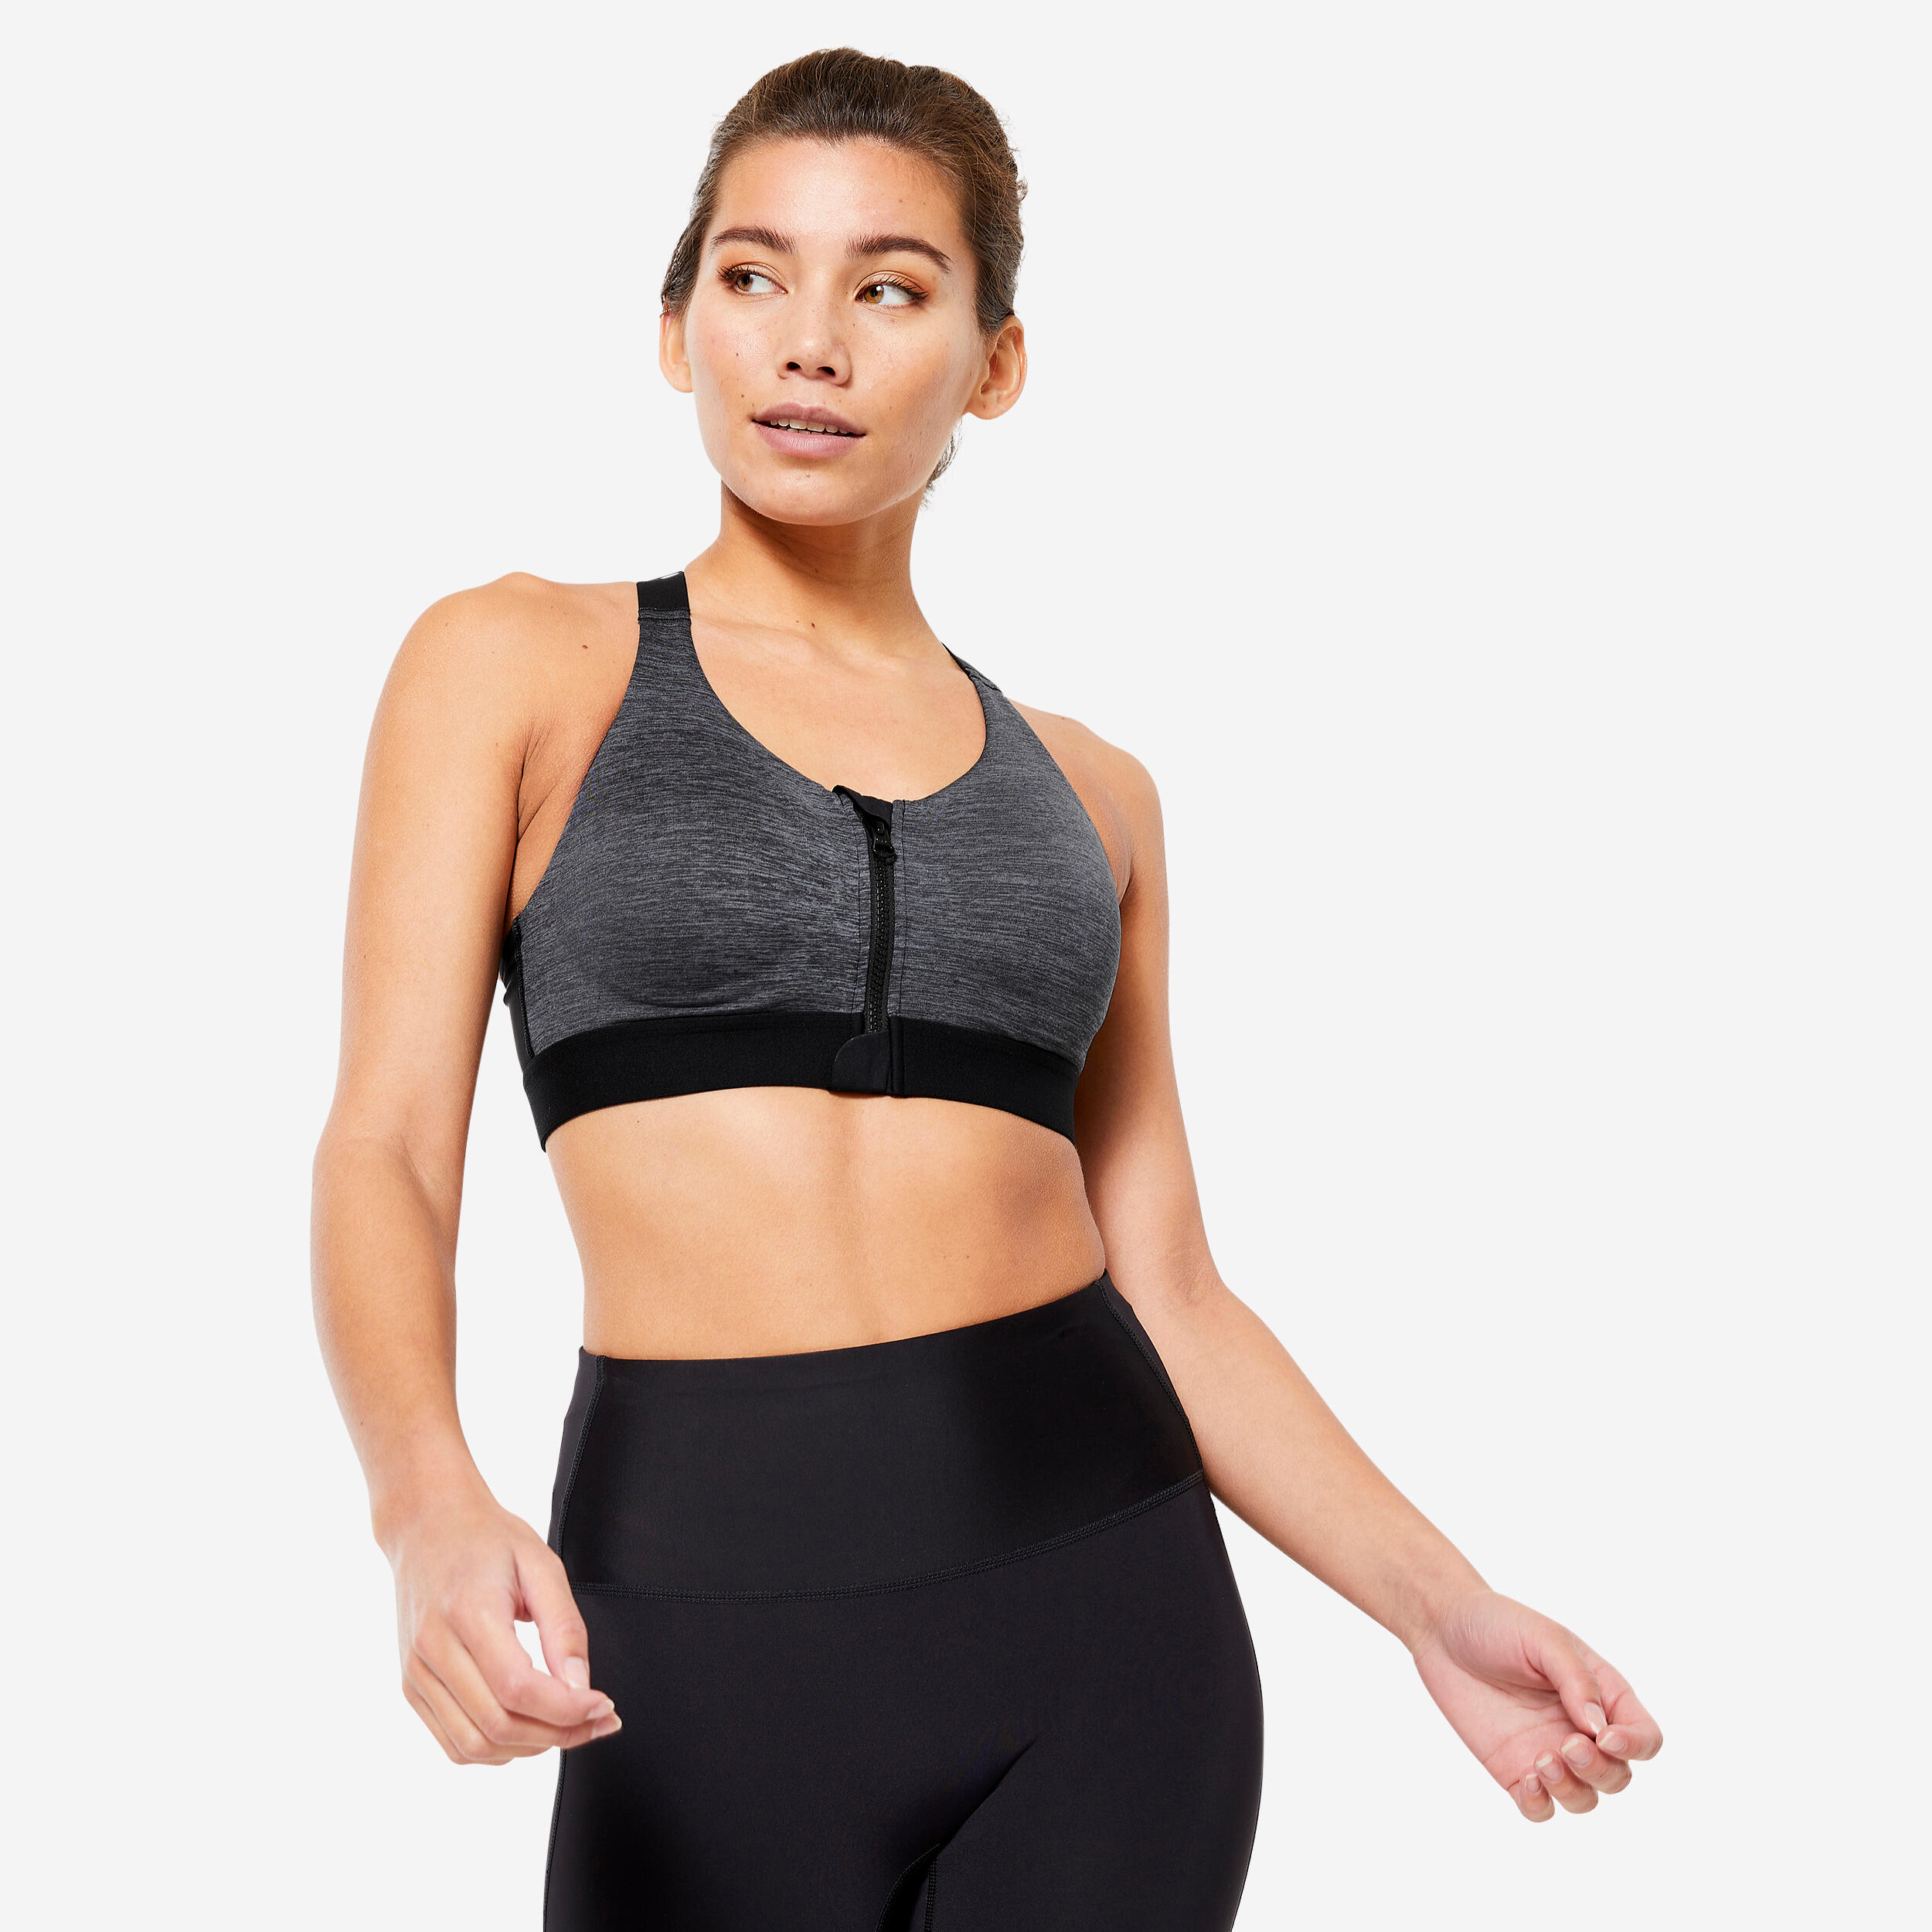 Women's High Support Zip-Up Sports Bra with Cups - Black/Grey 1/6